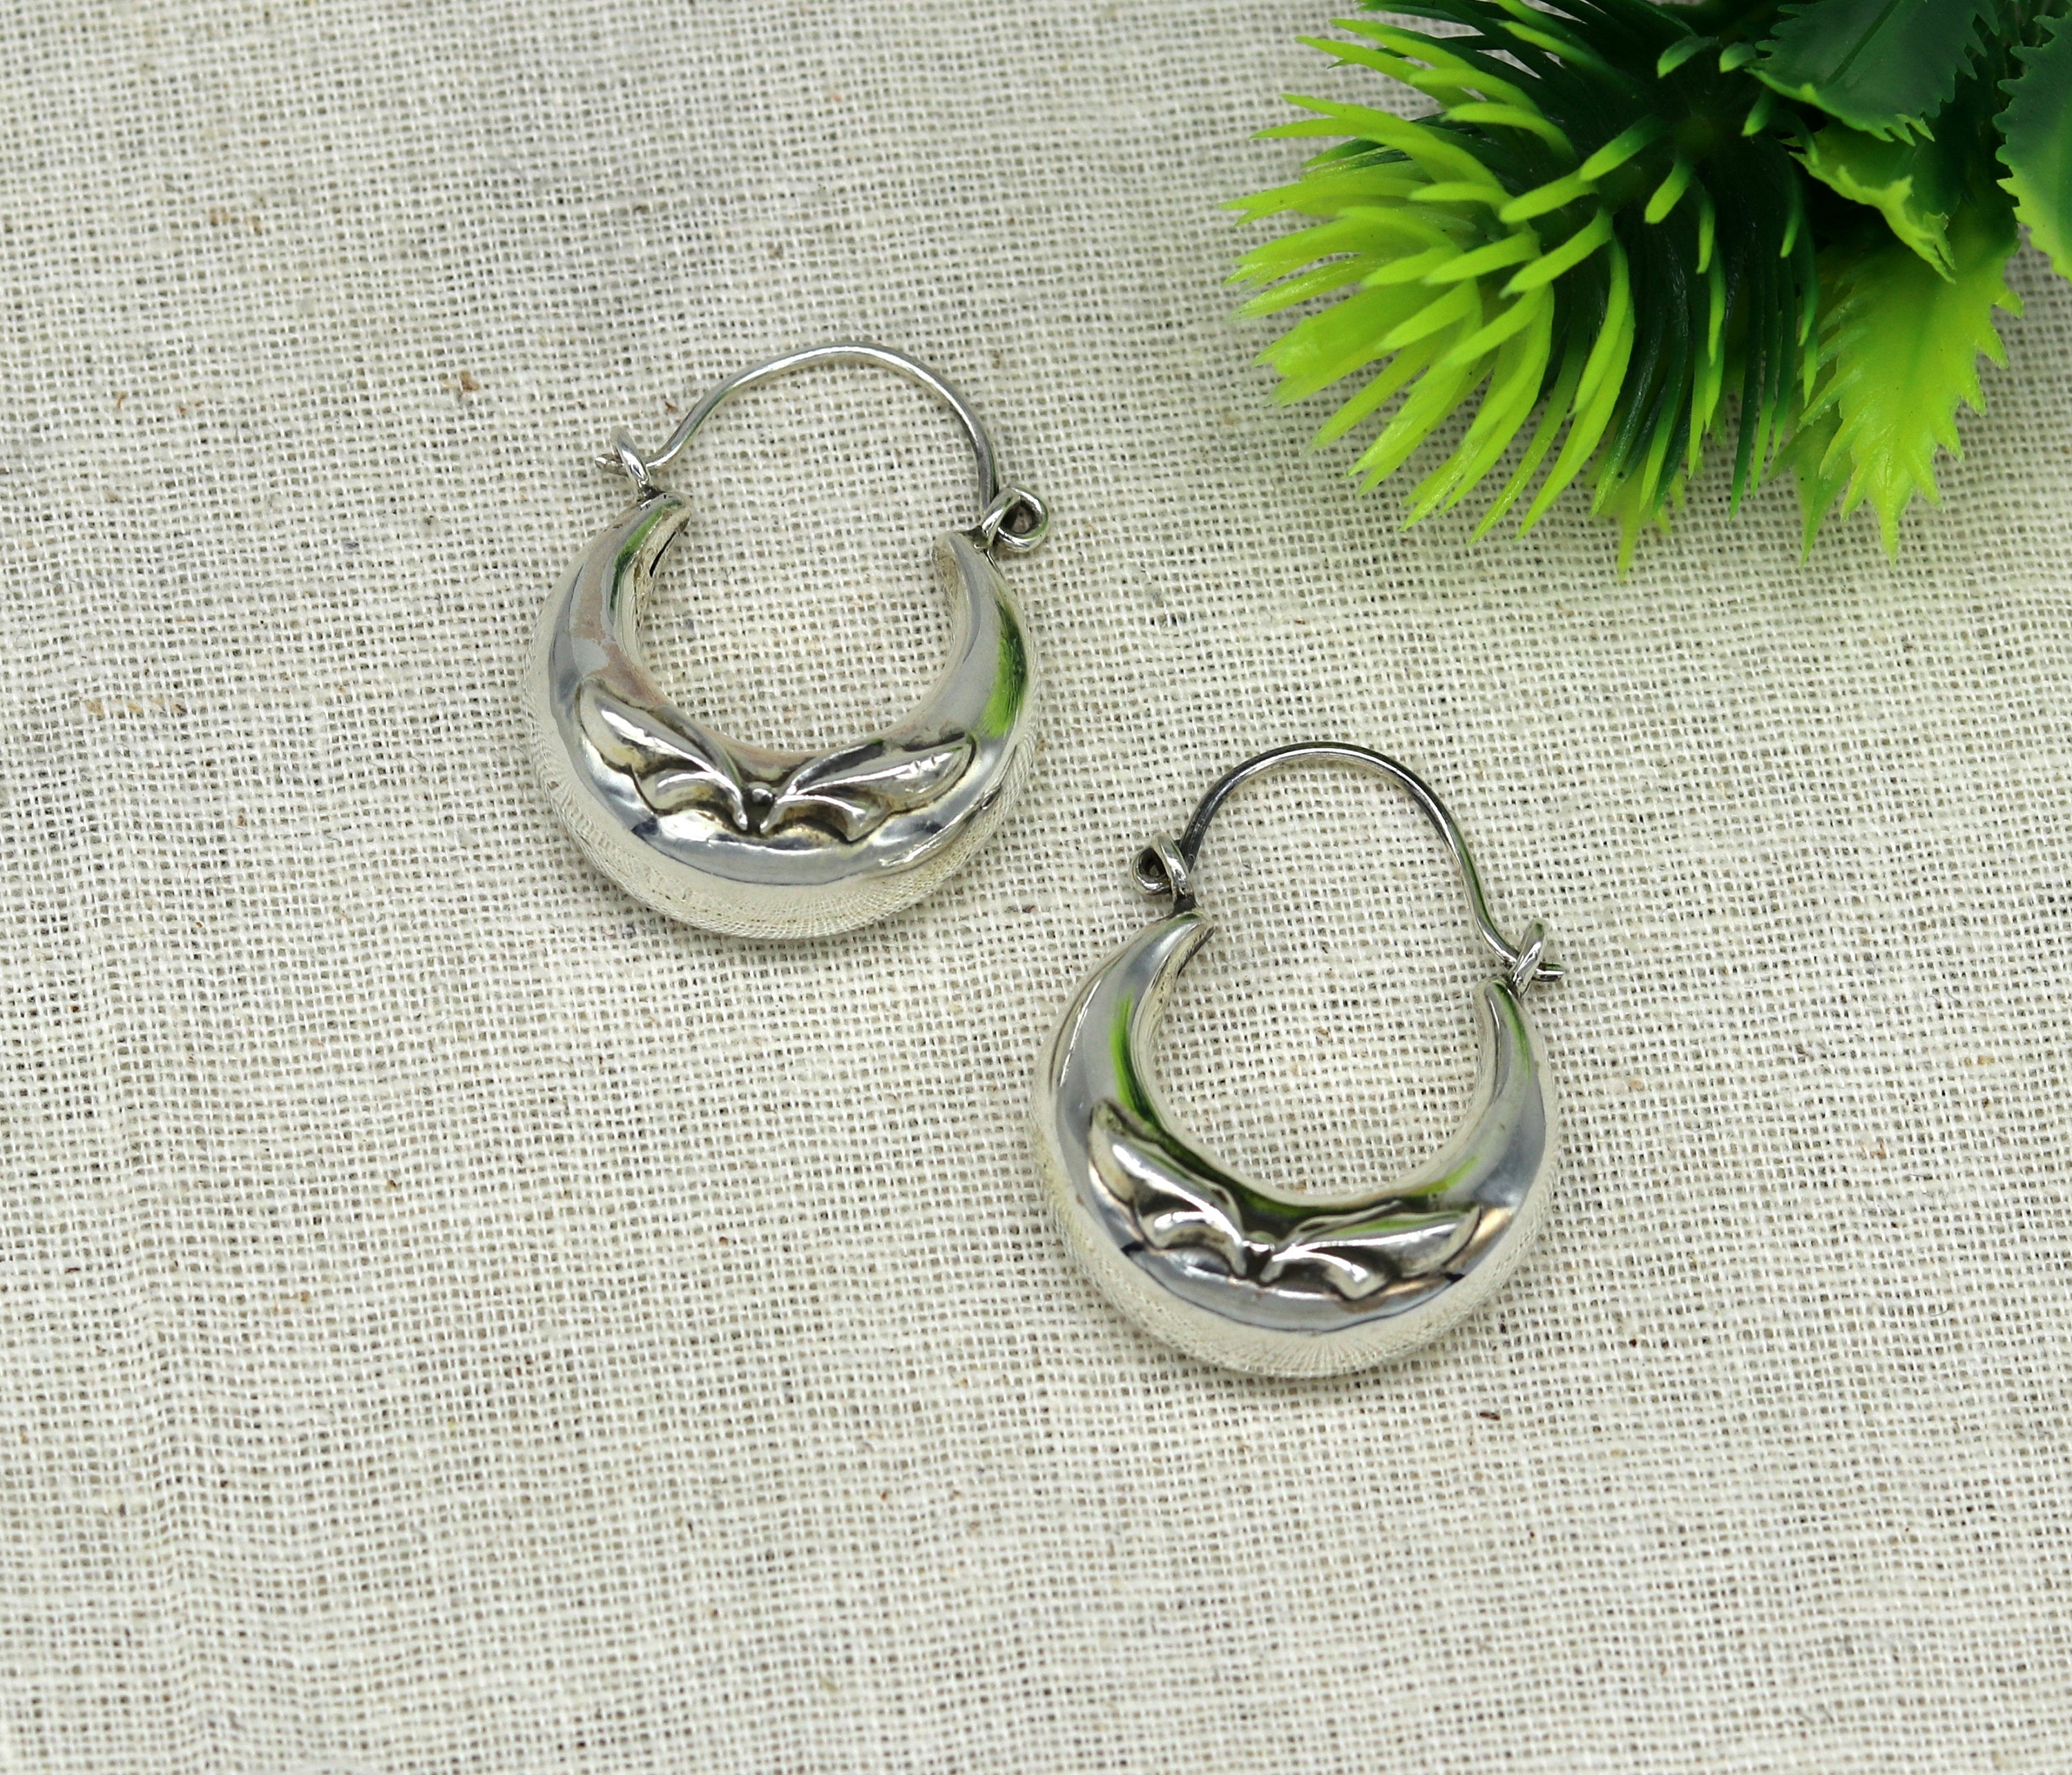 Buy Unique Silver Earrings, Hammered Sterling Silver Earrings, Drop Disk Earrings  Online in India - Etsy